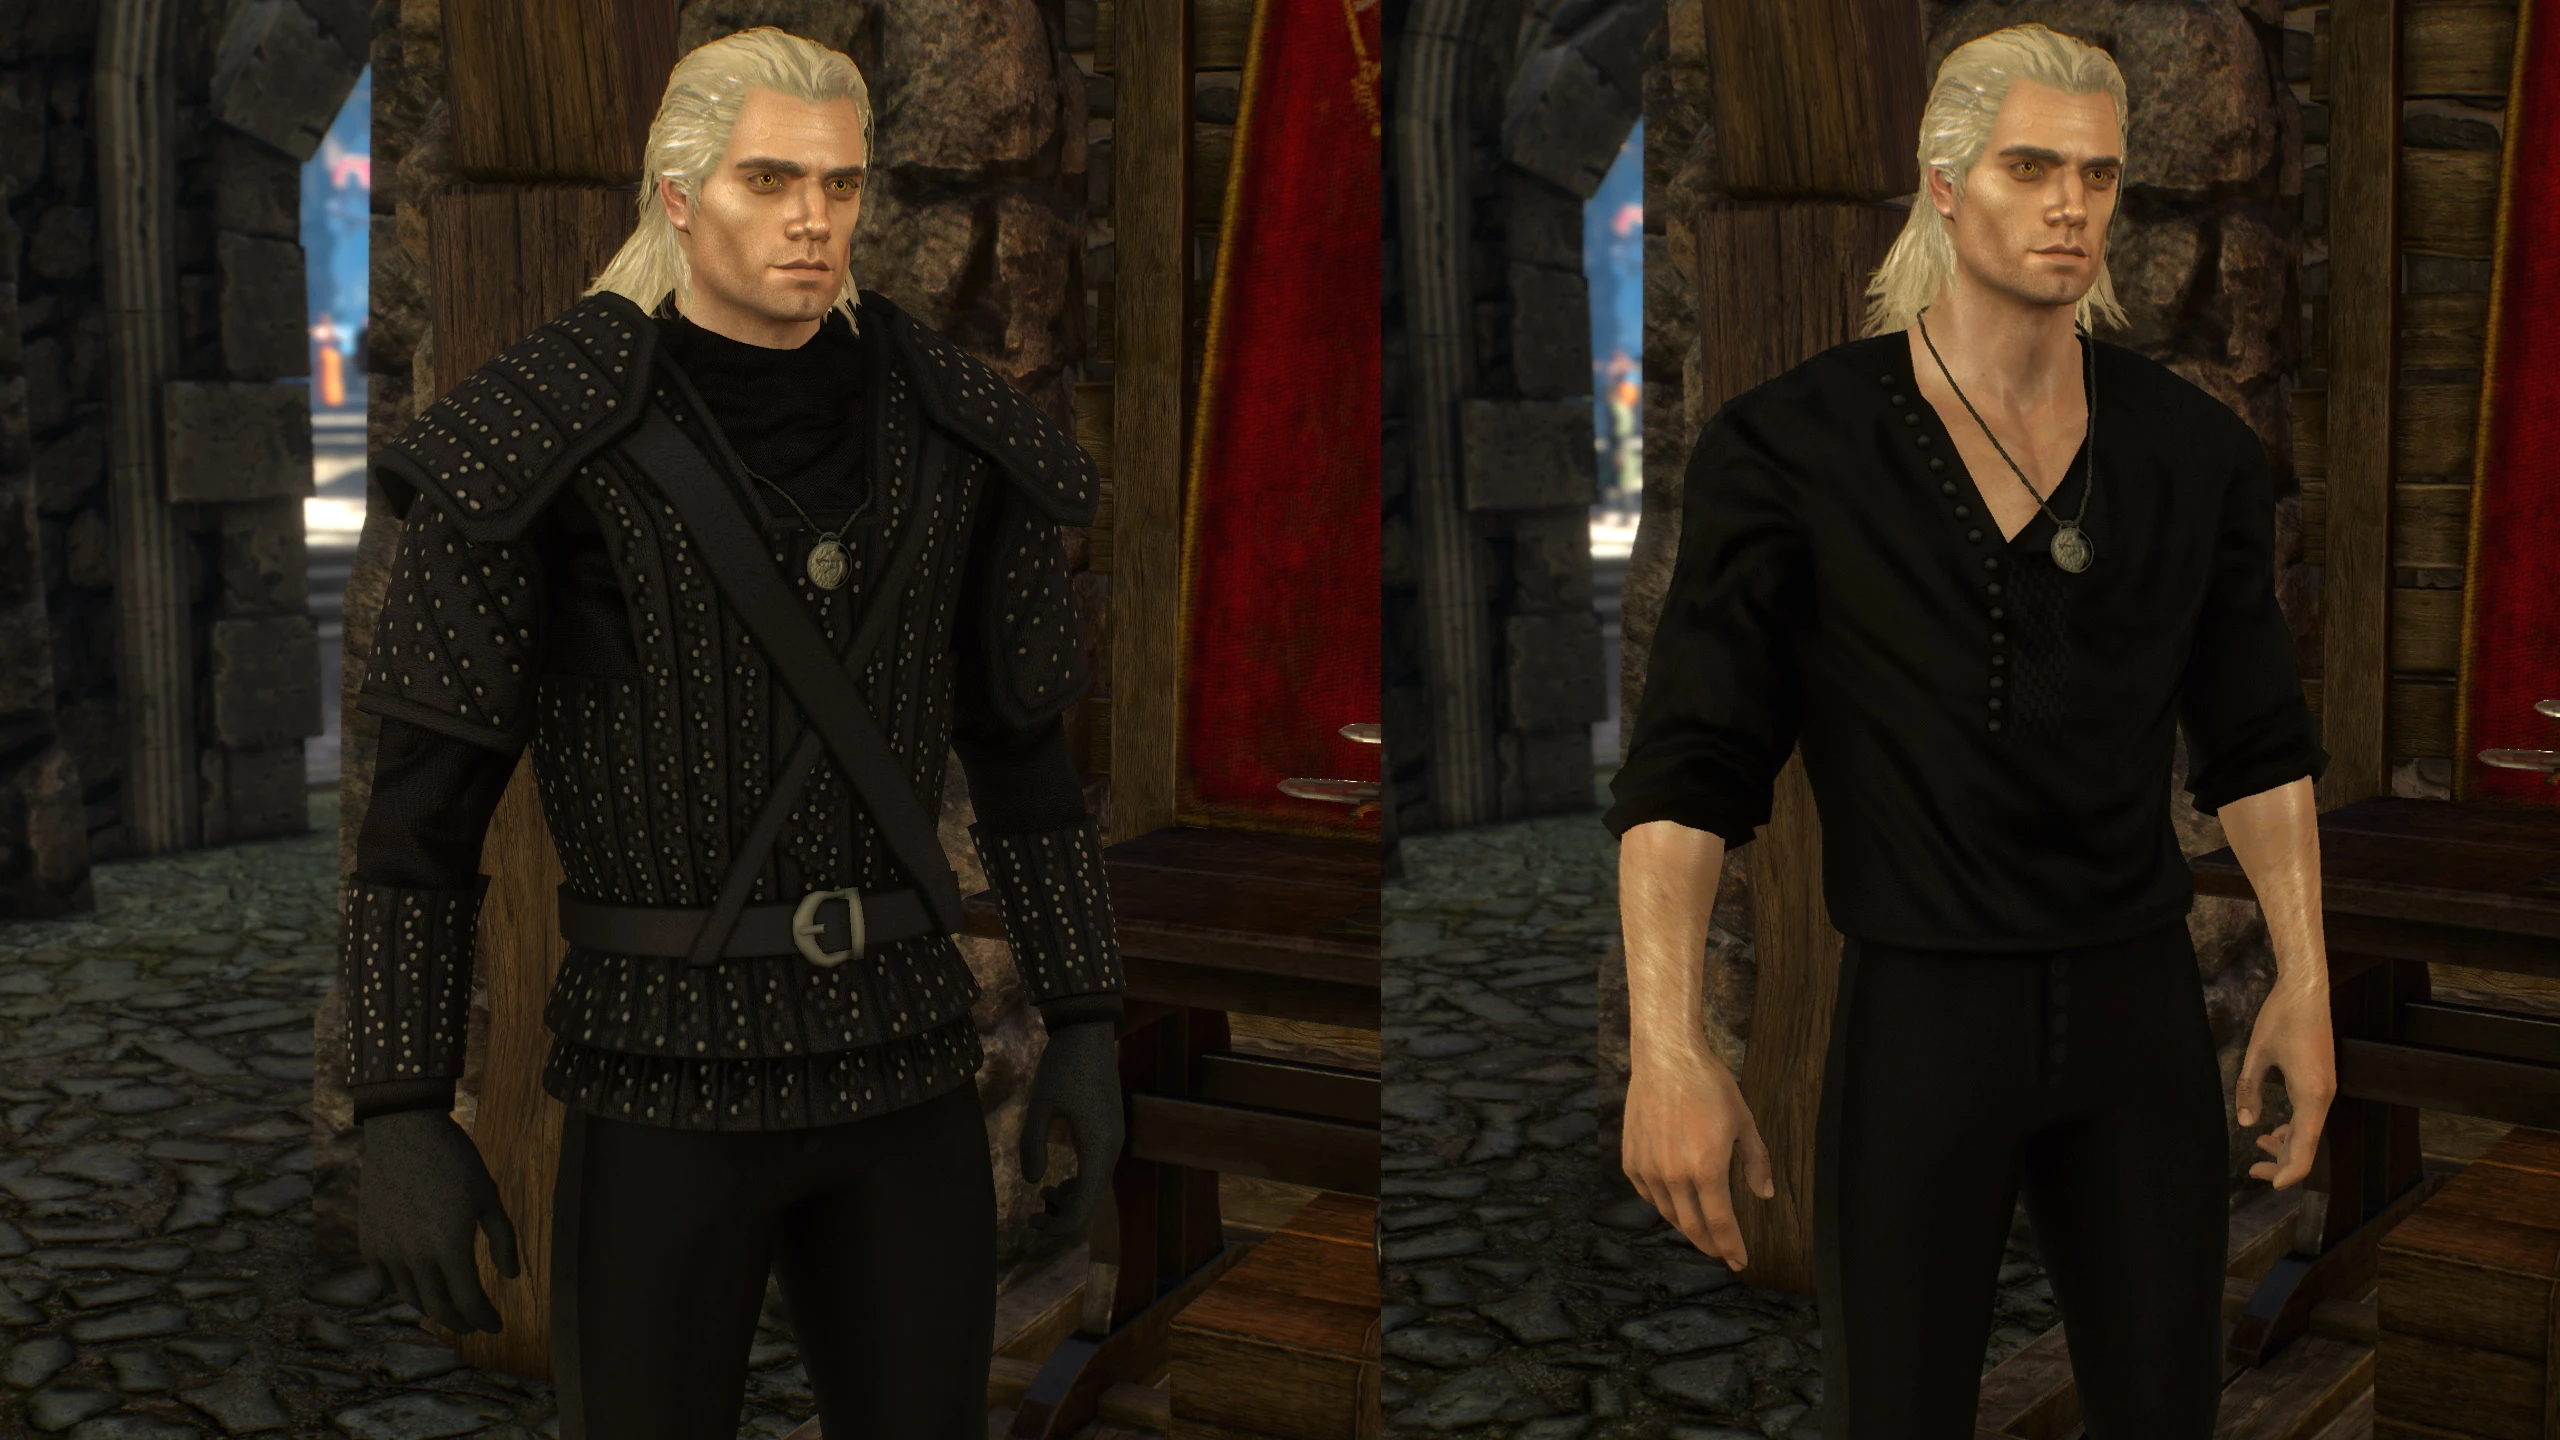 The Witcher 3: how to get Henry Cavill's armor and enable Netflix